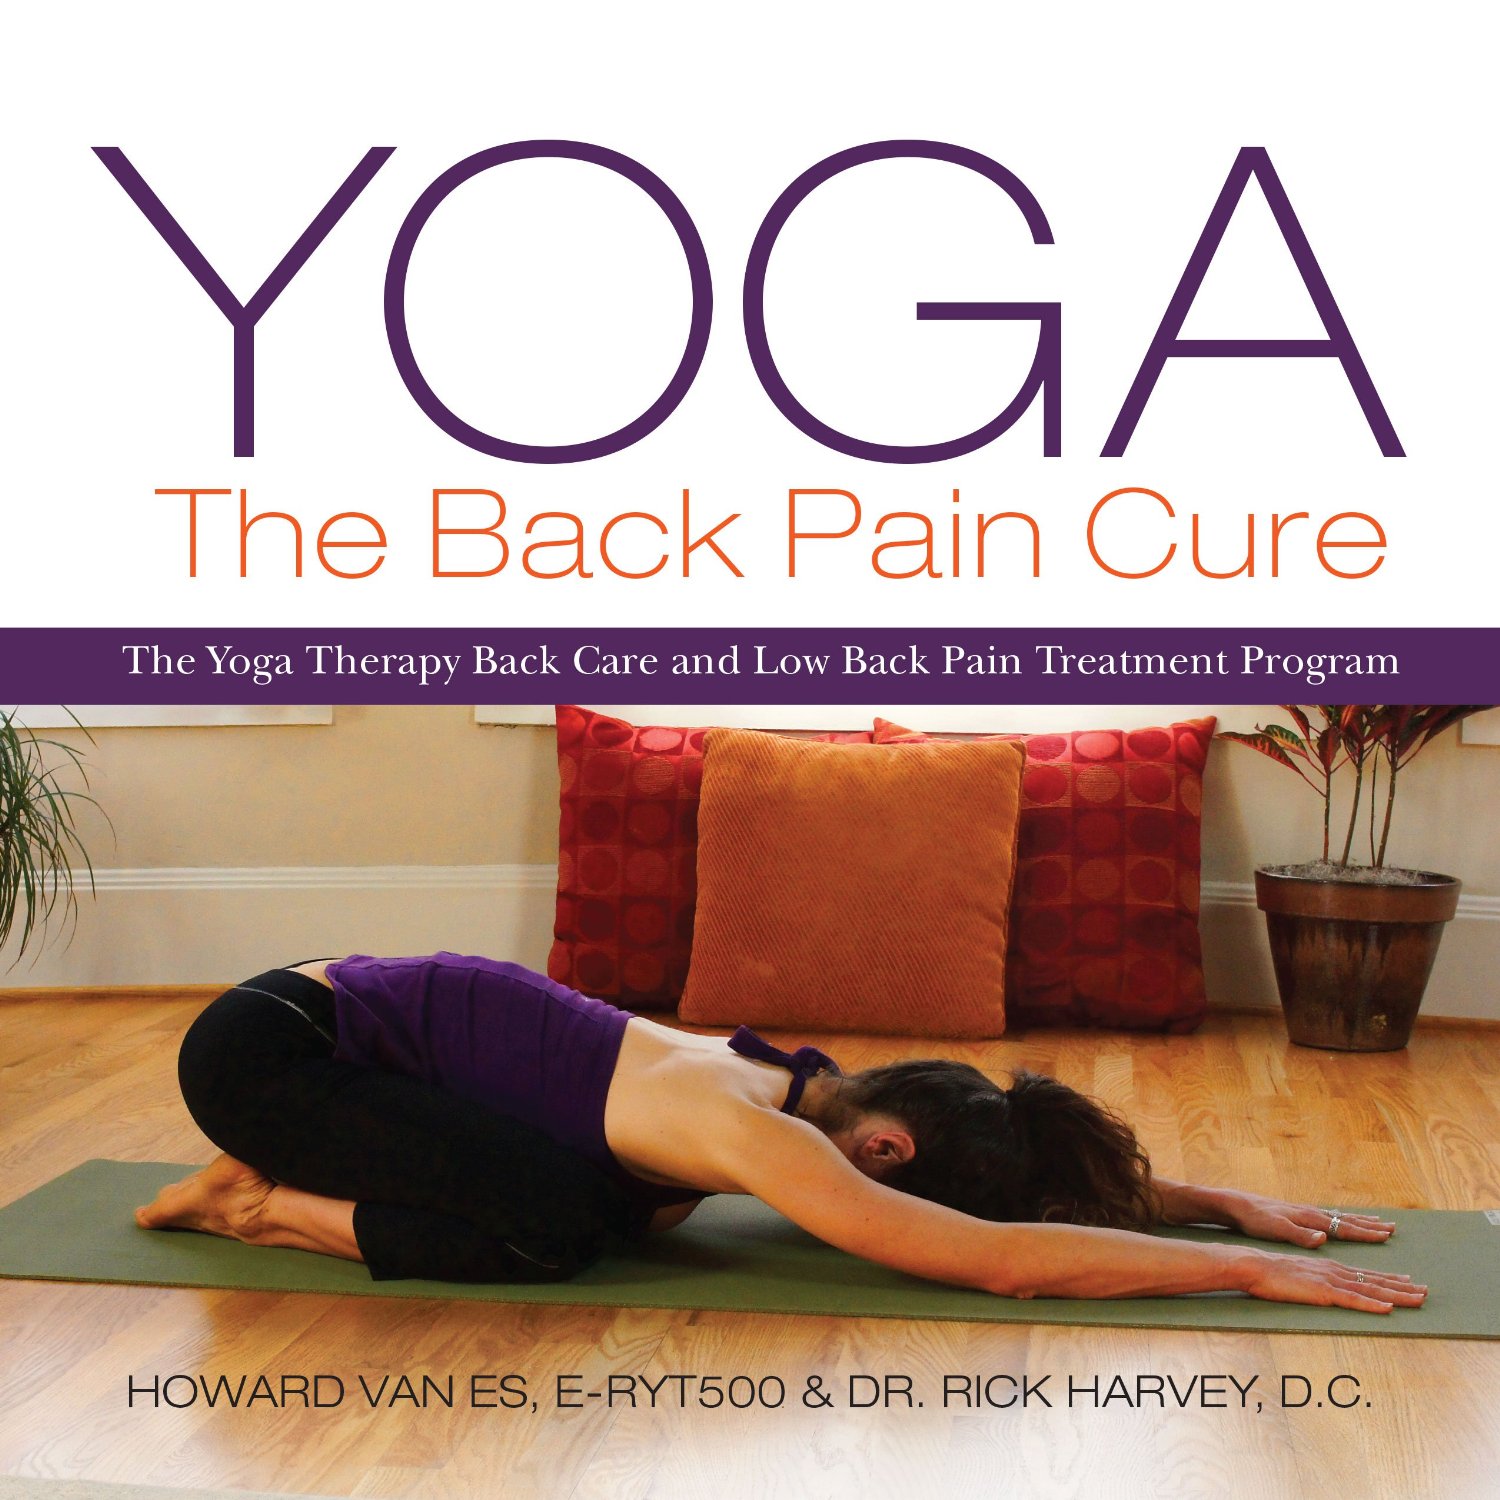 Yoga, The Back Pain Cure: The Yoga Therapy Back Care And Low Back Pain Treatment Program